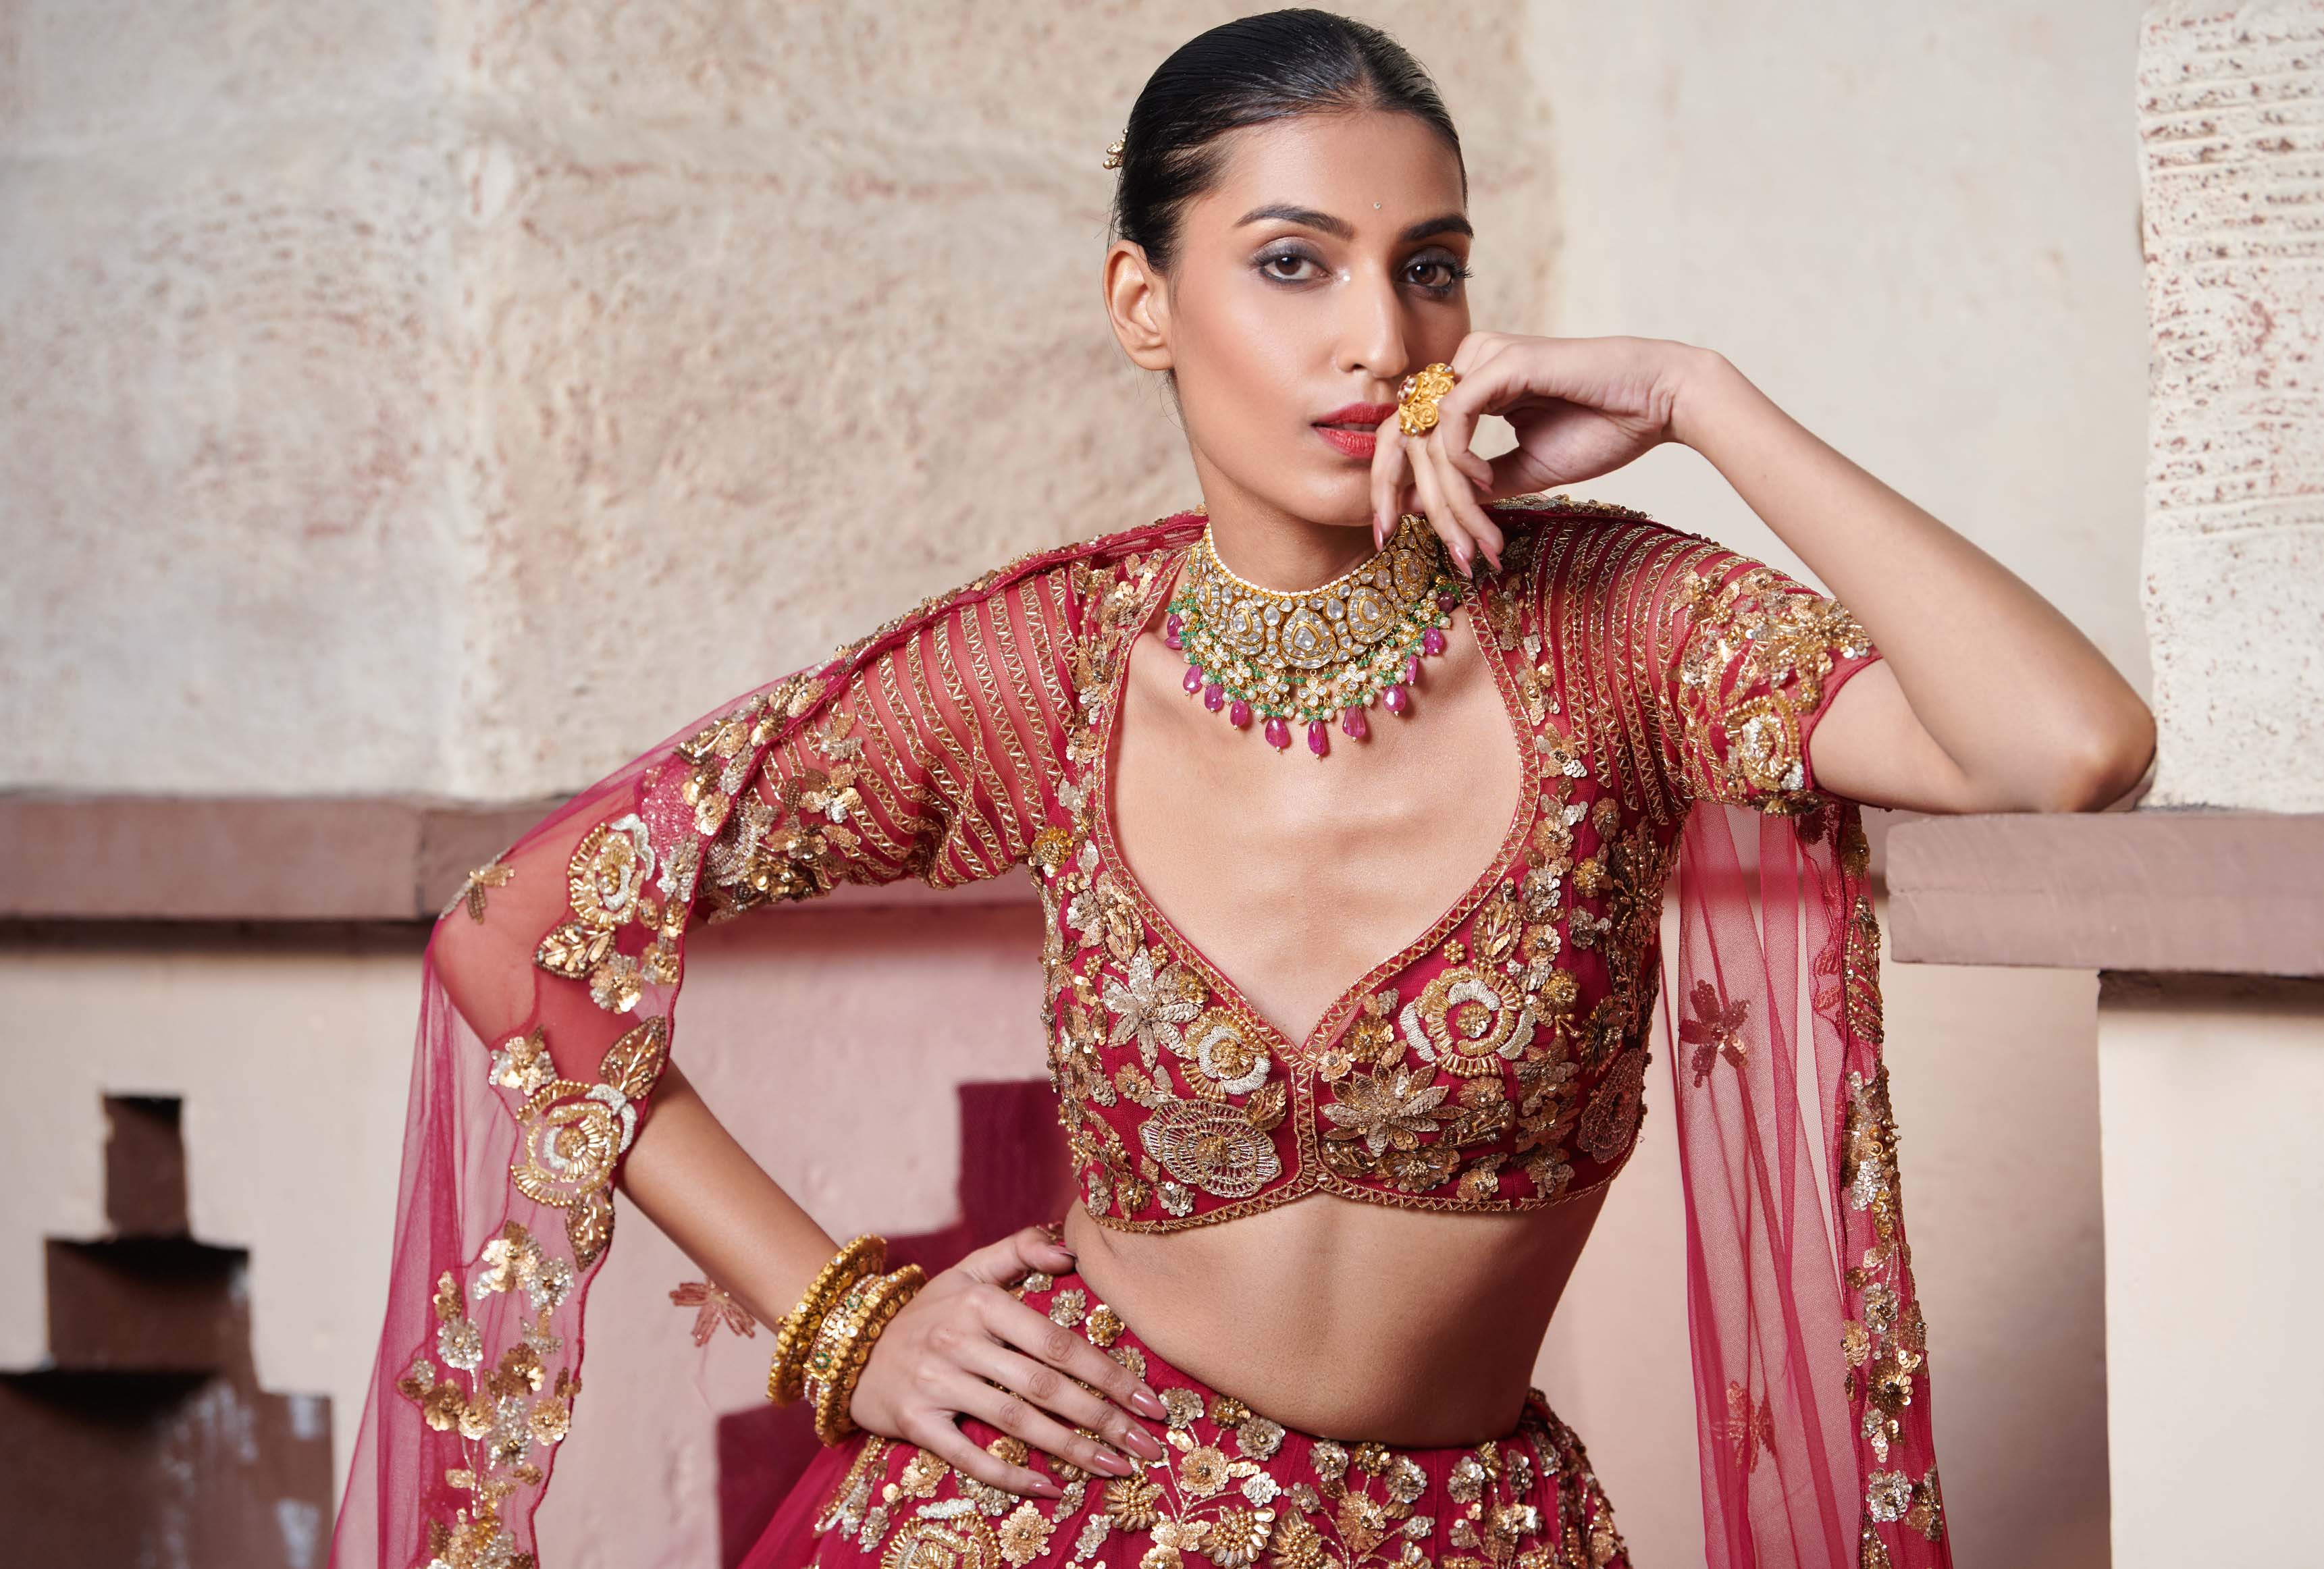 Dreamy Pink Lehenga Designs We Just Can't Stop Swooning Over